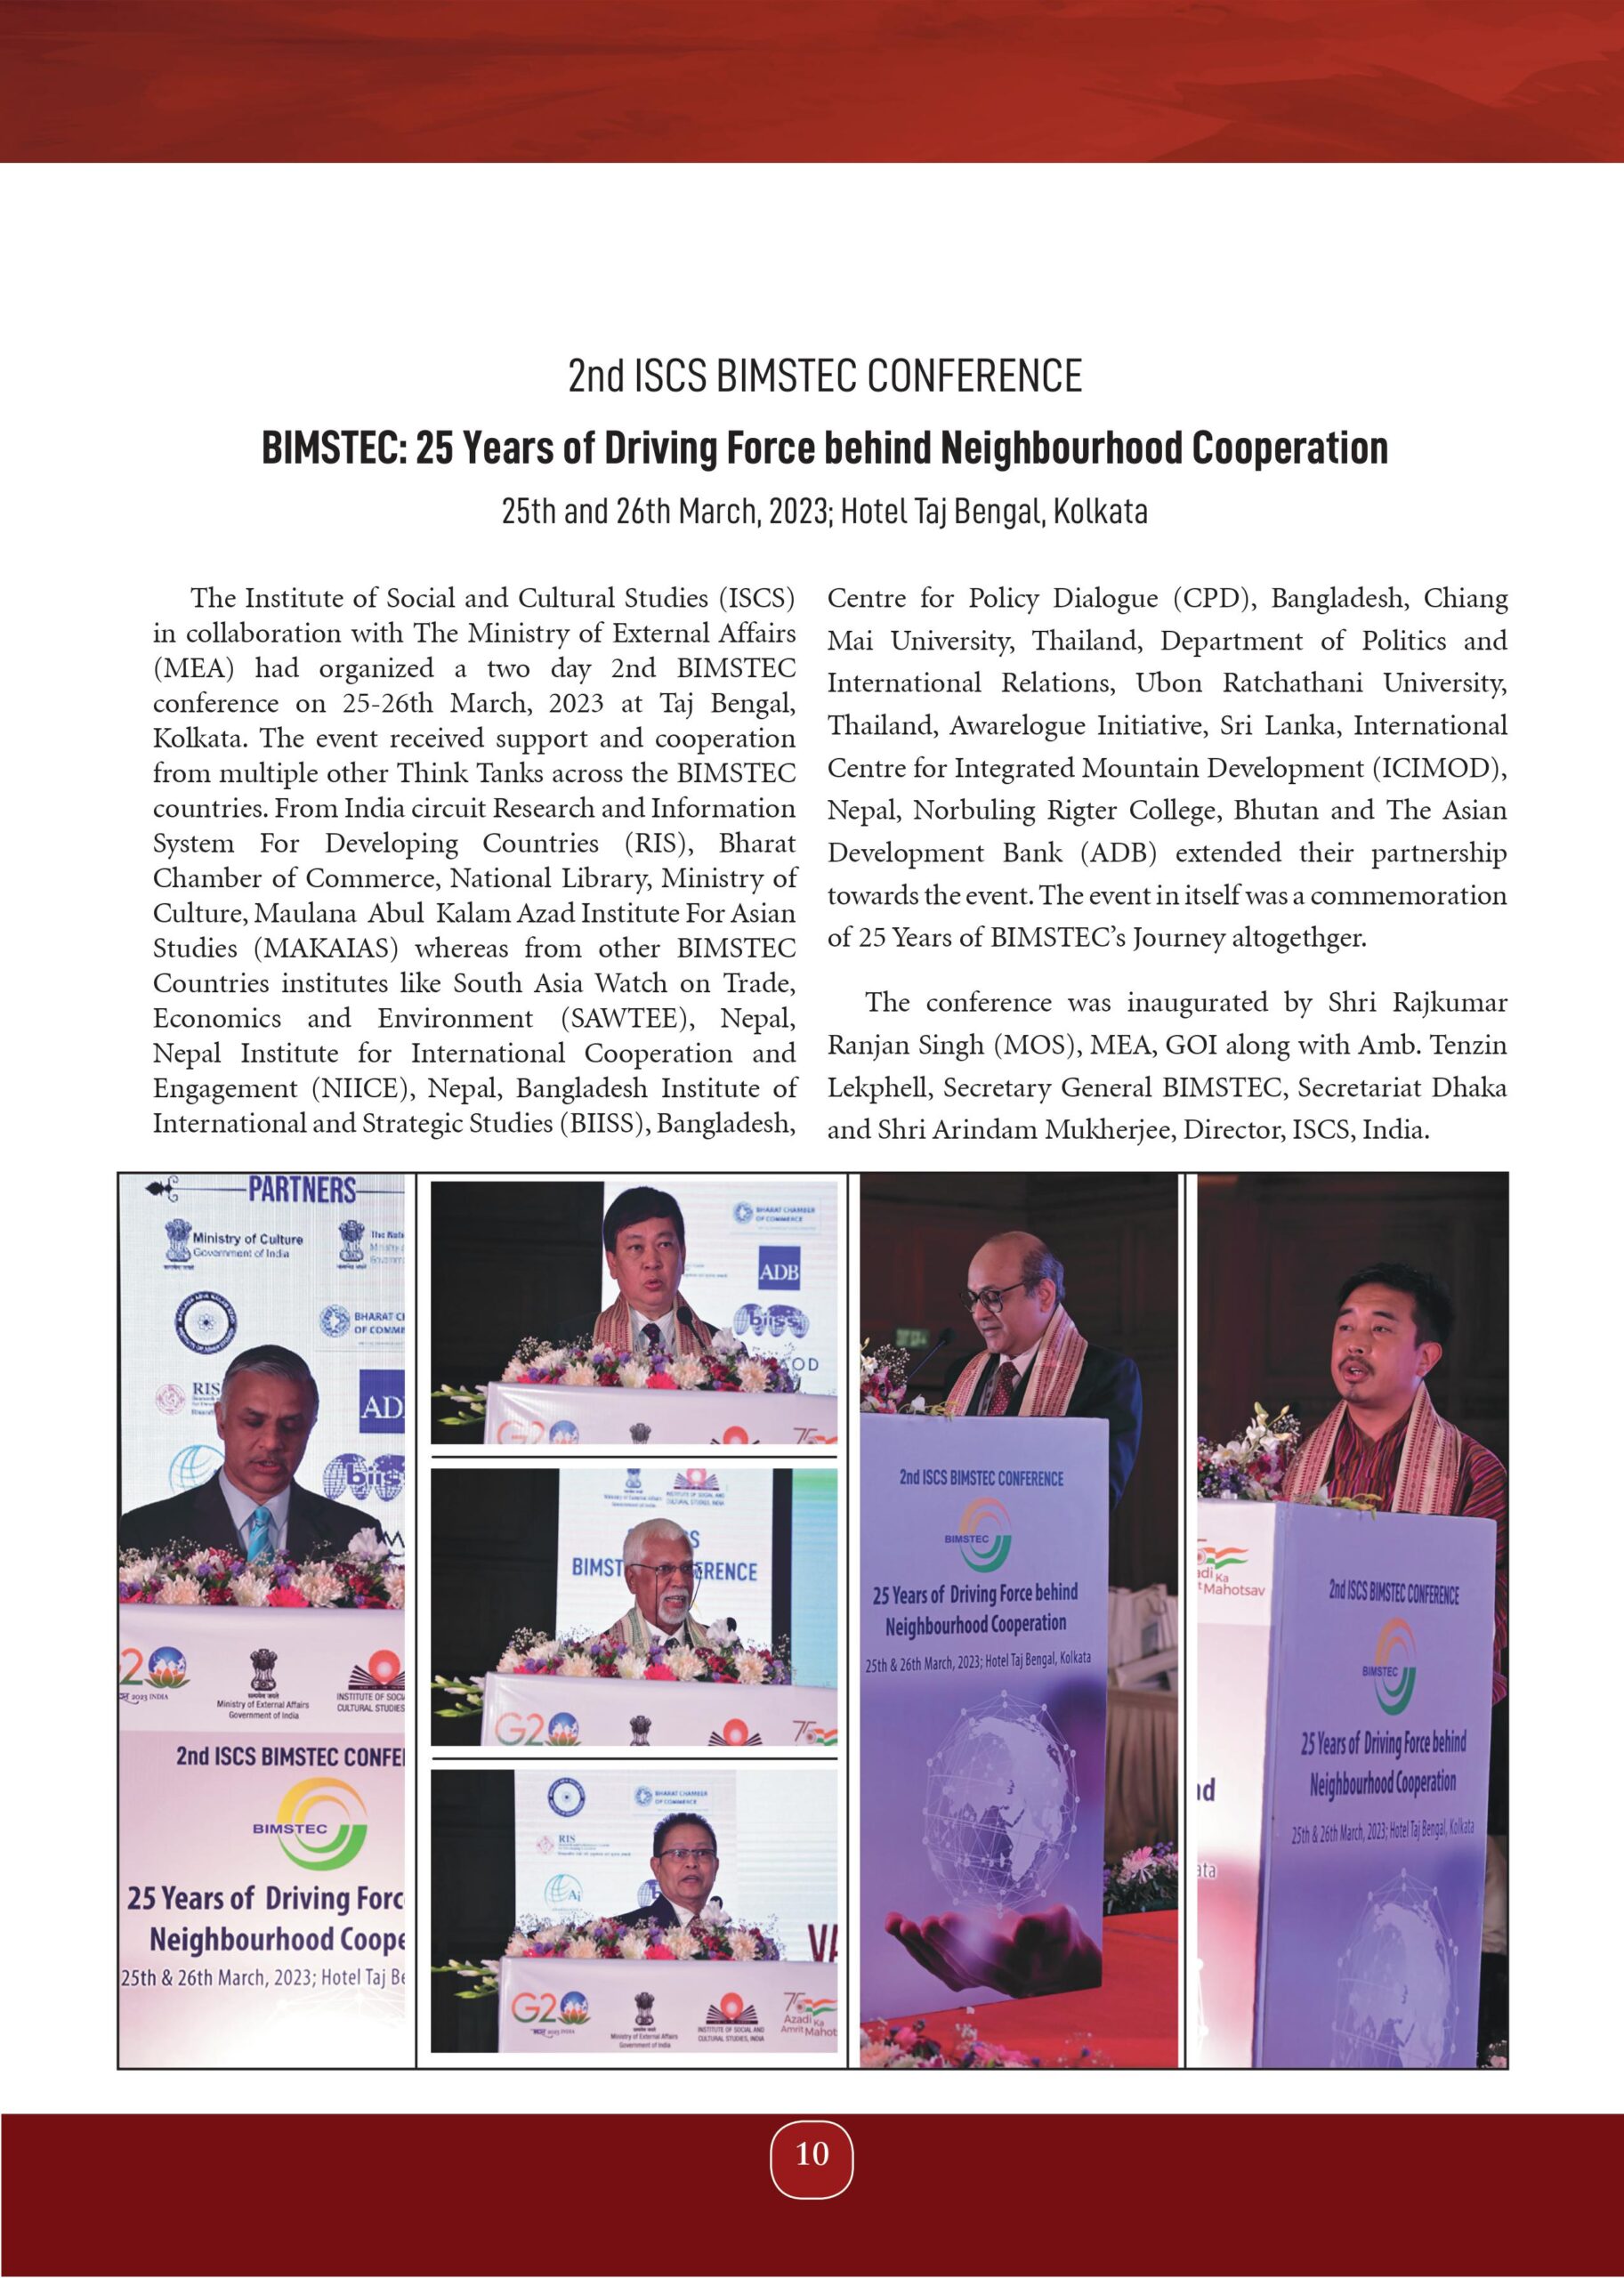 BIMSTEC: 25 Years of Driving Force behind Neighbourhood Cooperation